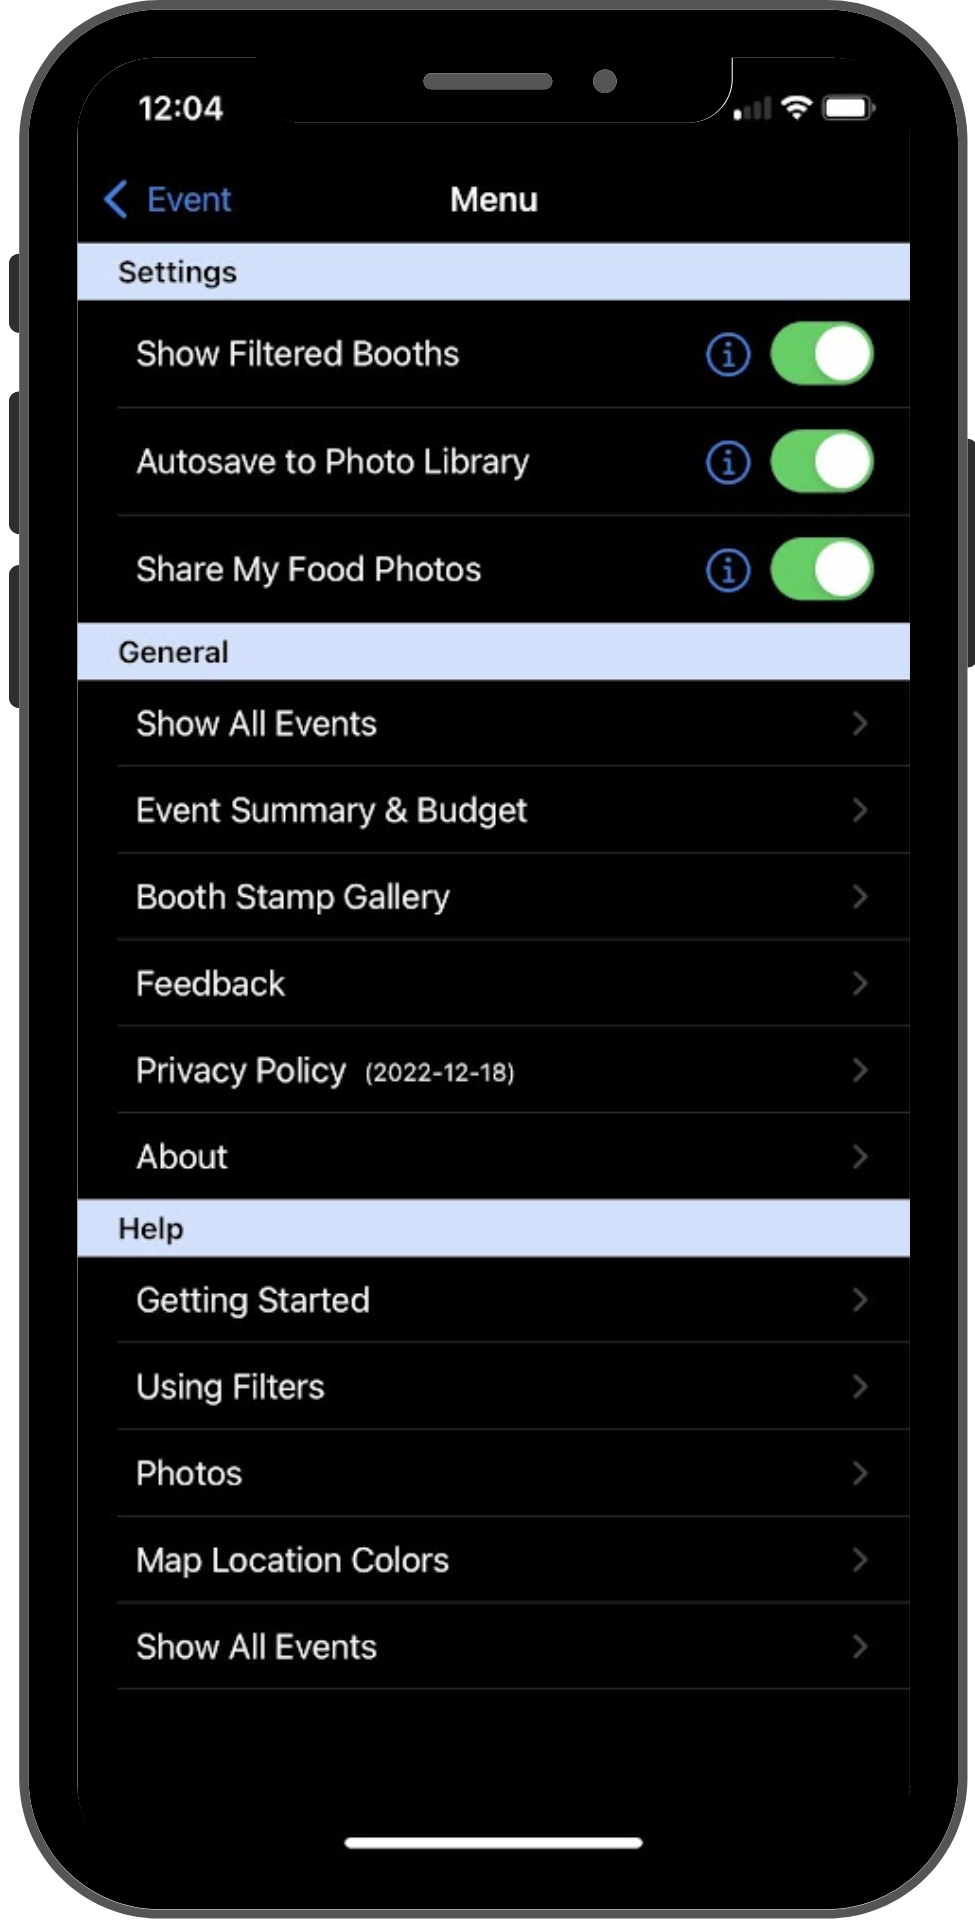 A menu shows multiple sections labeled Settings, General, and Help. In each one, several items are displayed.